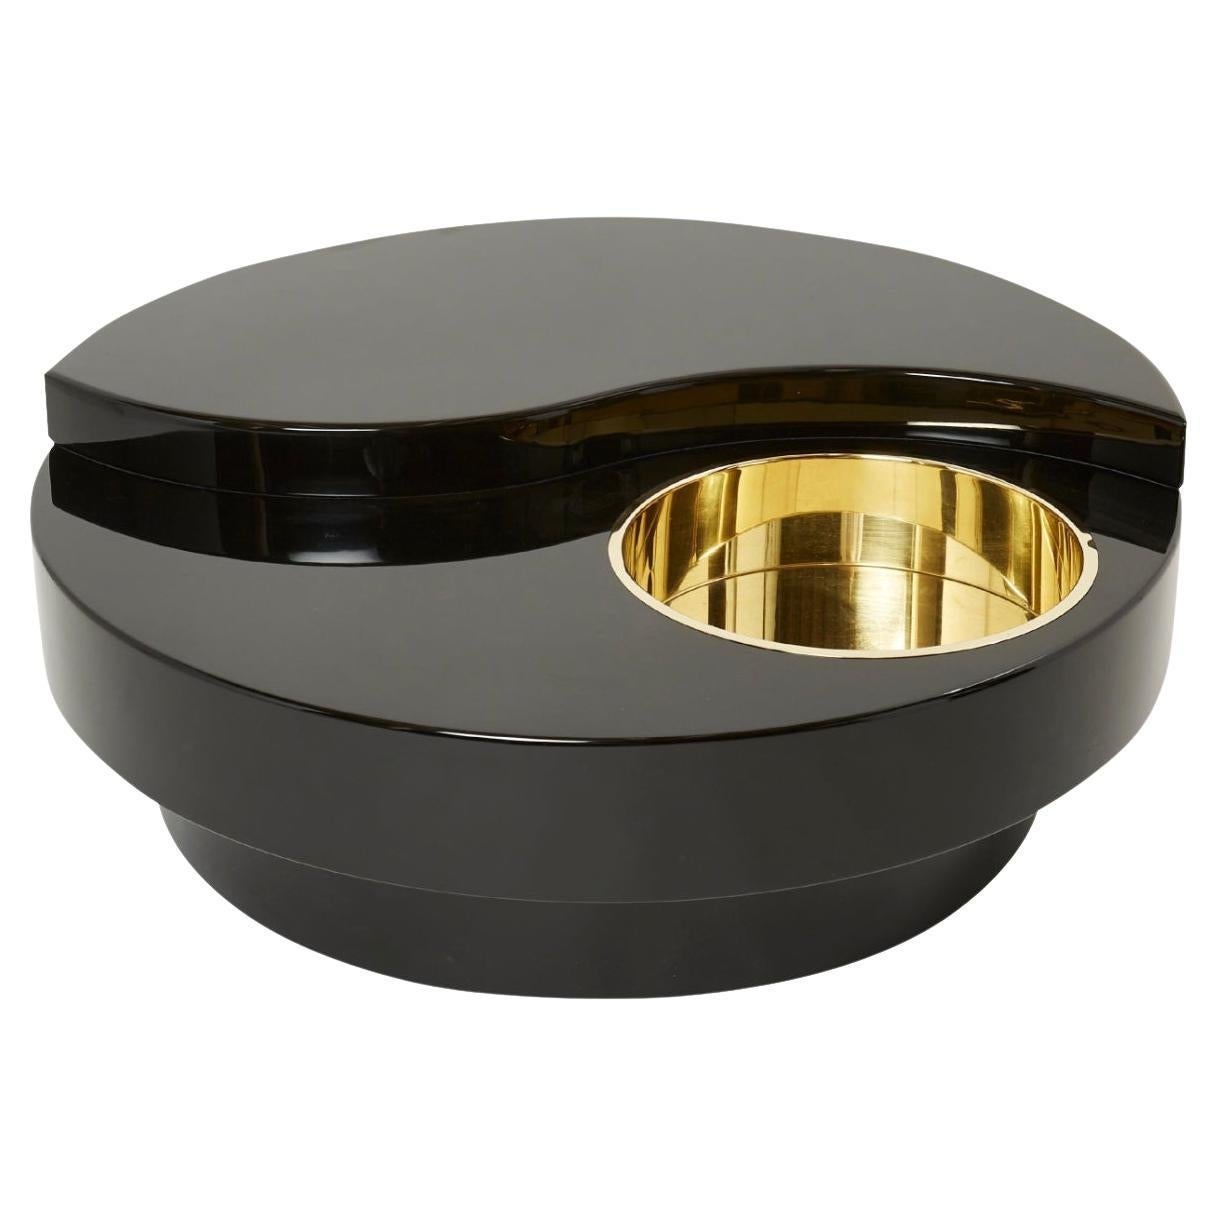 Willy Rizzo Polished Black Lacquer/Brass Swivel Cocktail Table, Italy, 1970's For Sale